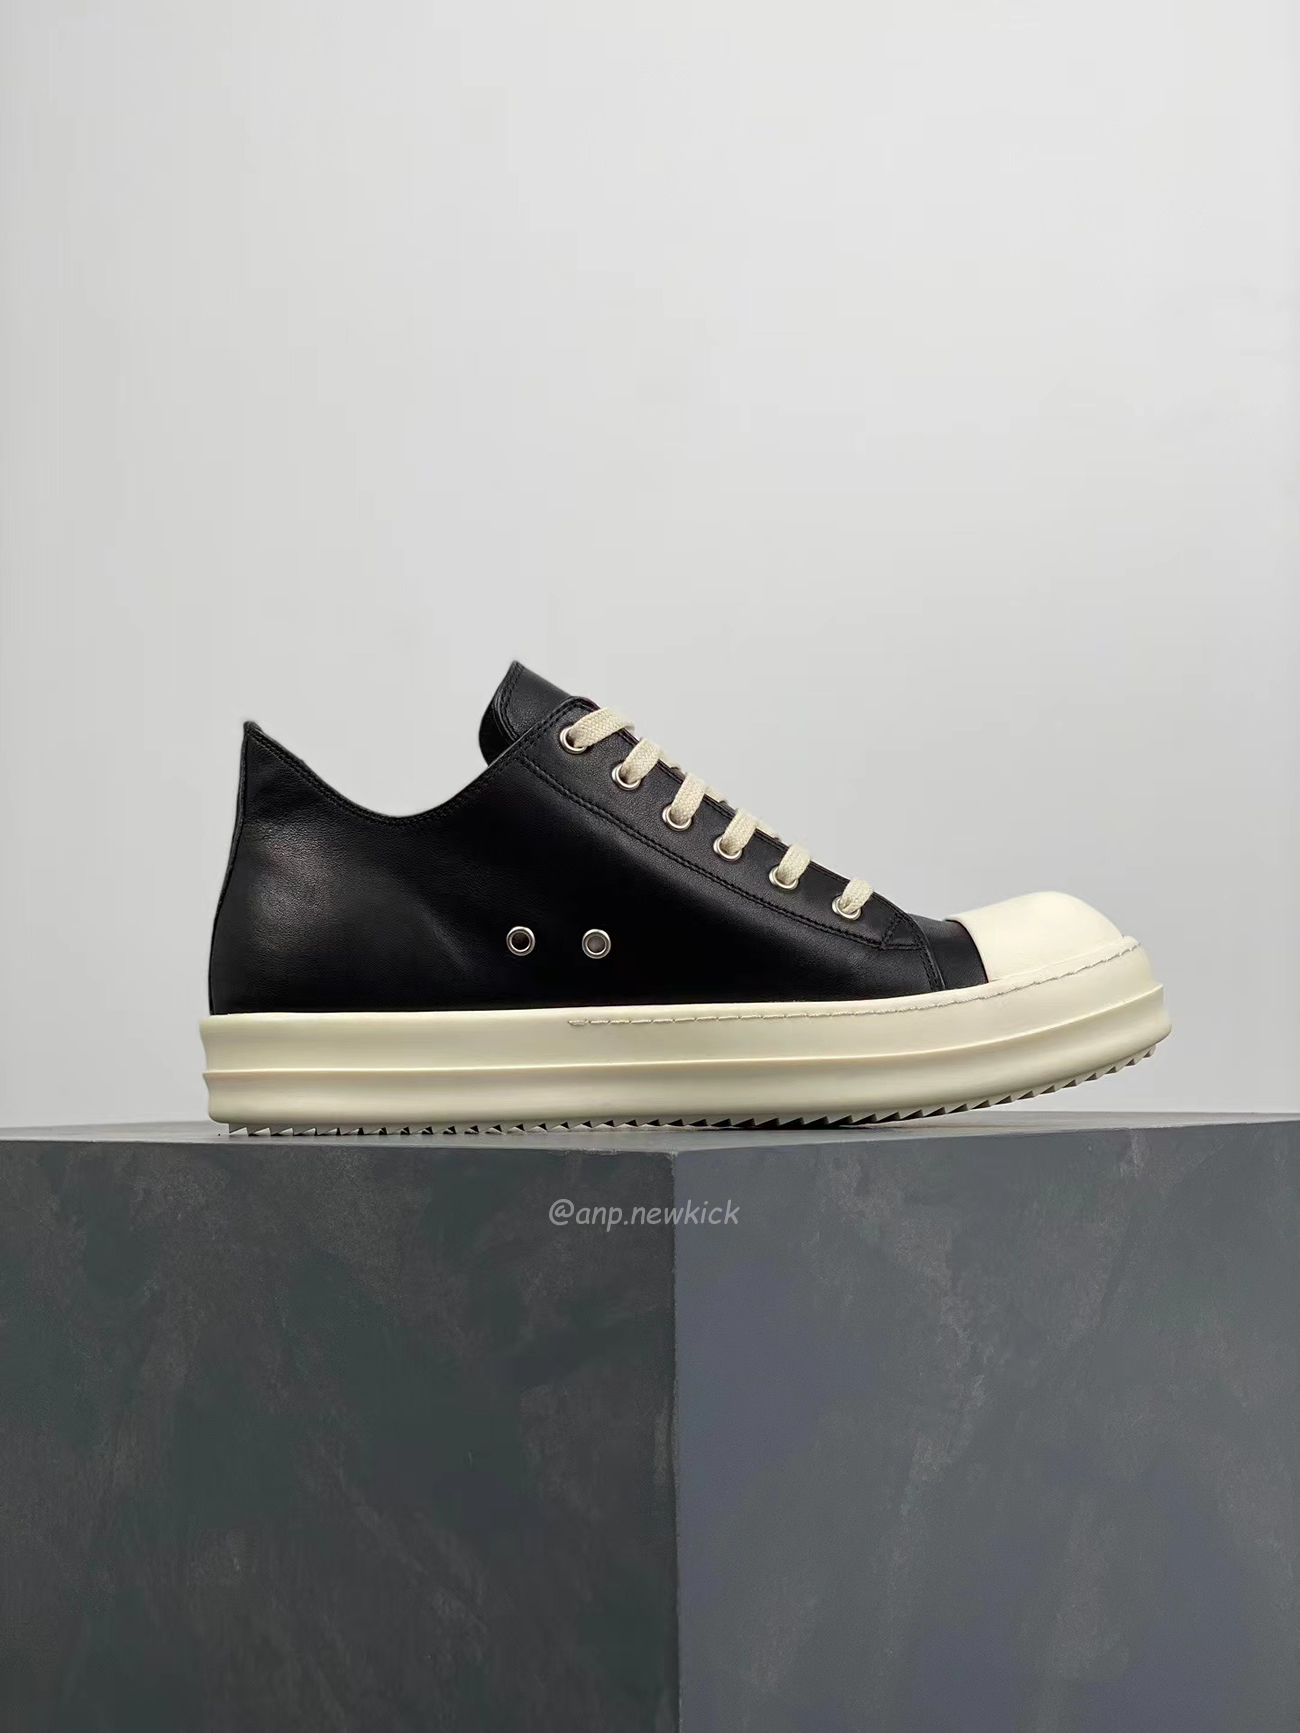 Rick Owens Leather Low Top Vintage Sneakers Suede Canvas Black Taupe Grey Faded Pnk Pearl Milk Dark Dust (32) - newkick.org